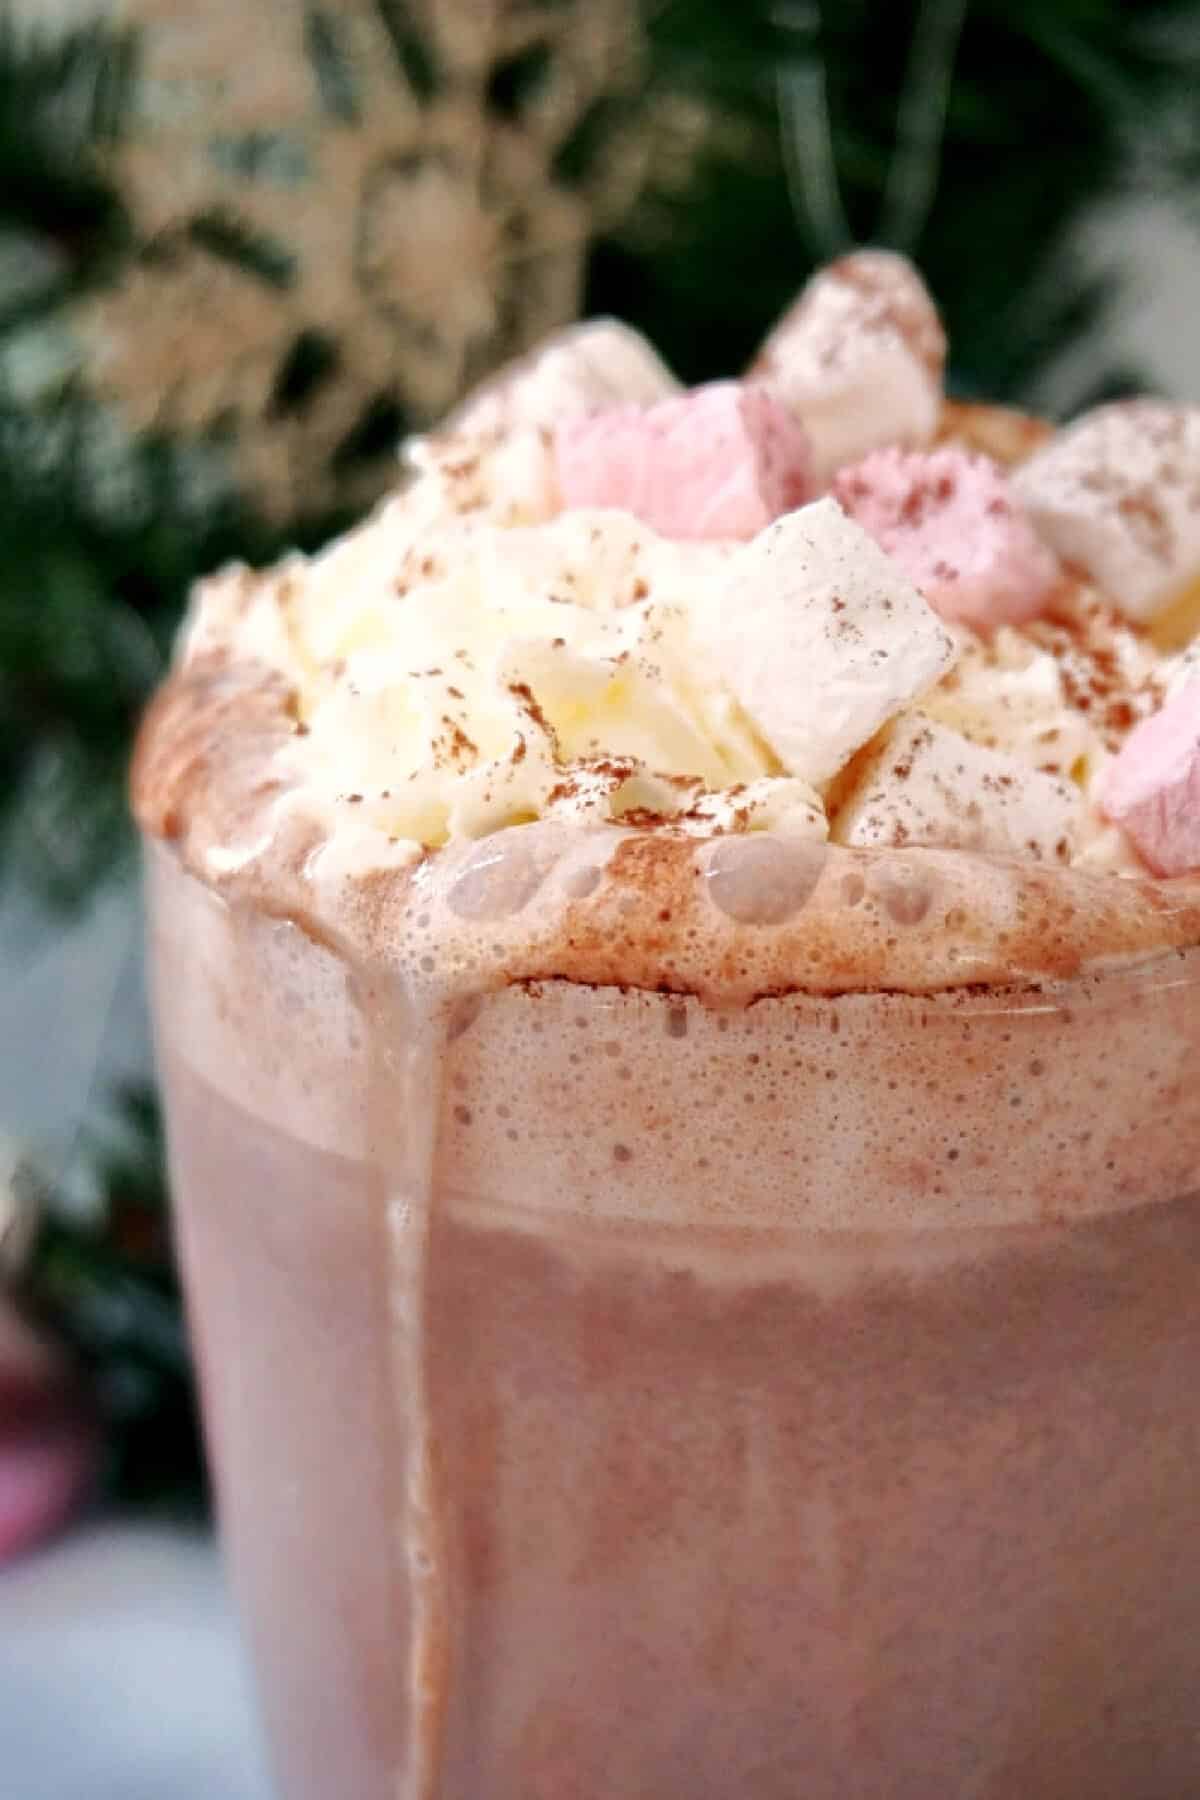 A cup with hot chocolate with marshmallows and cream.